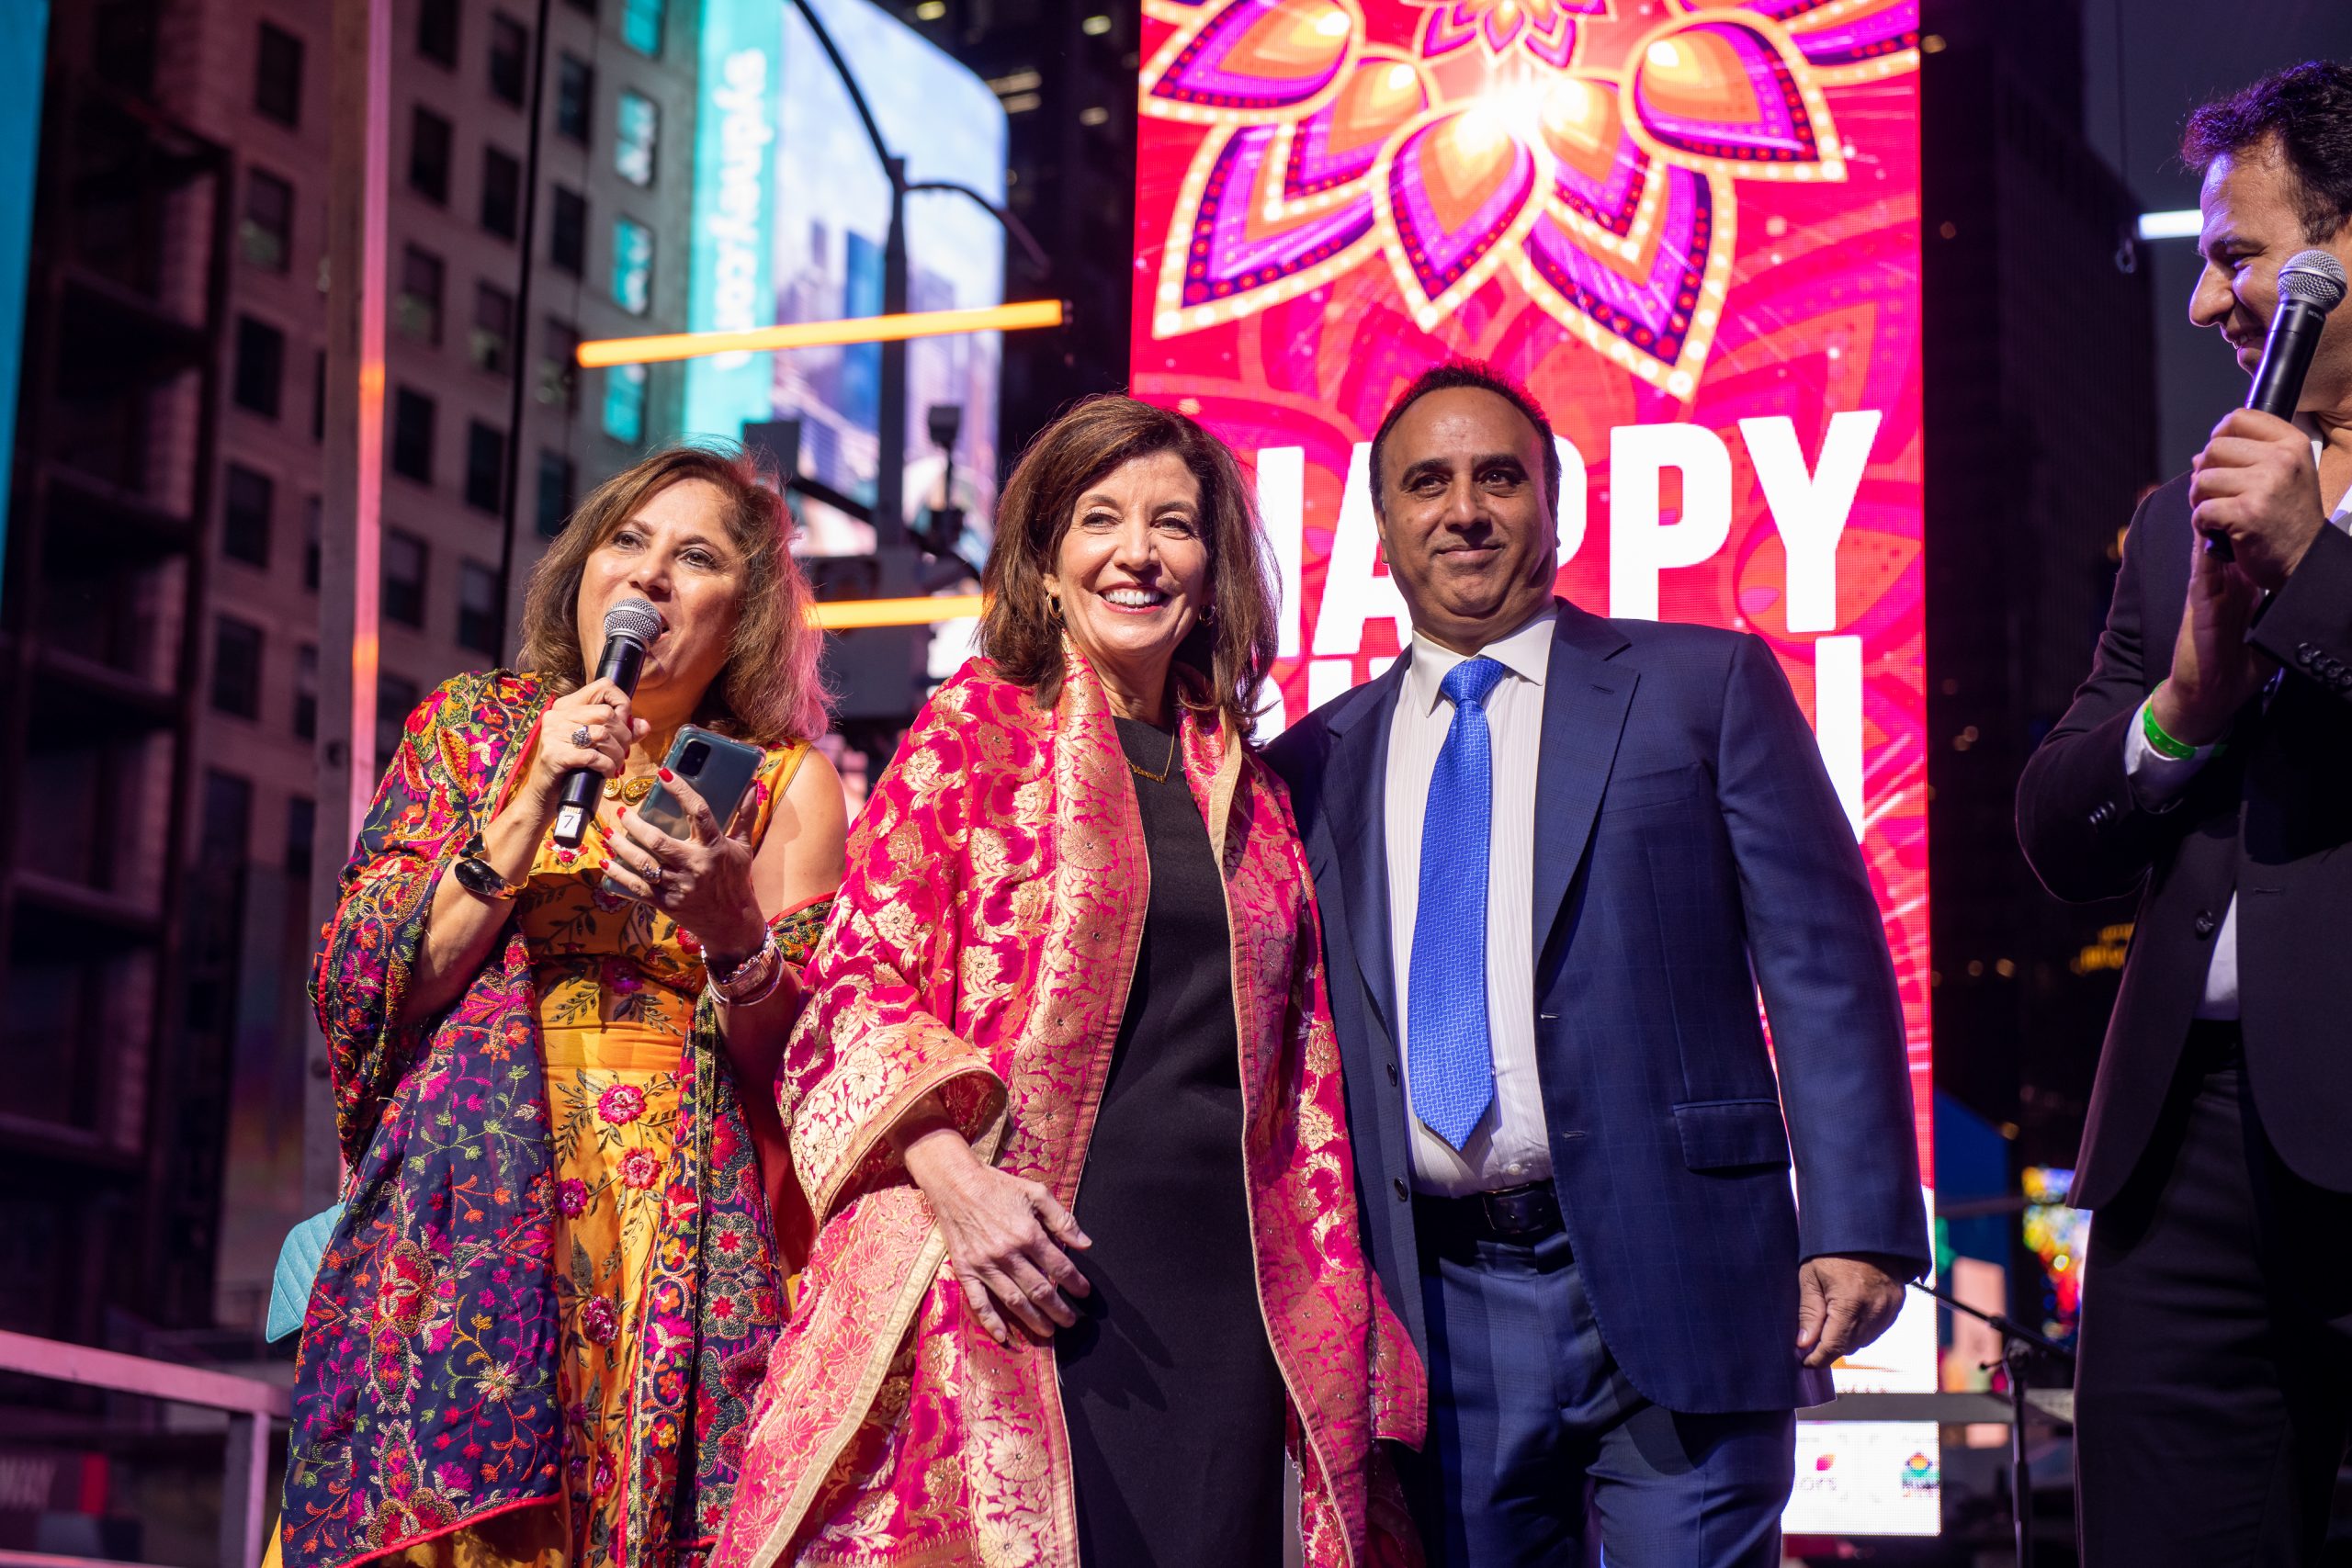 Diwali at Times Square: A Grand Celebration in the Heart of New York City